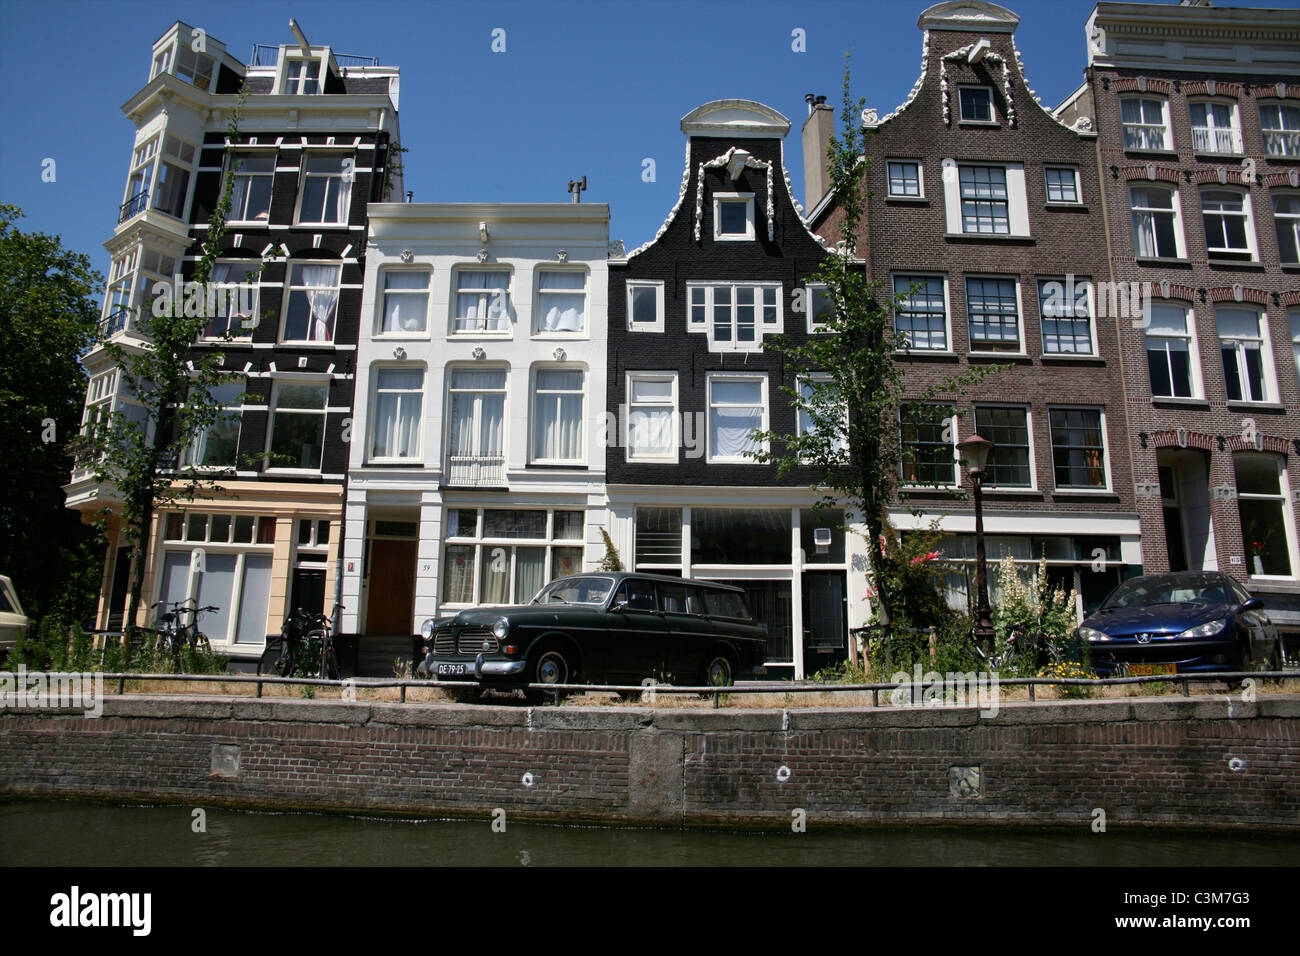 Canals in Amsterdam Stock Photo